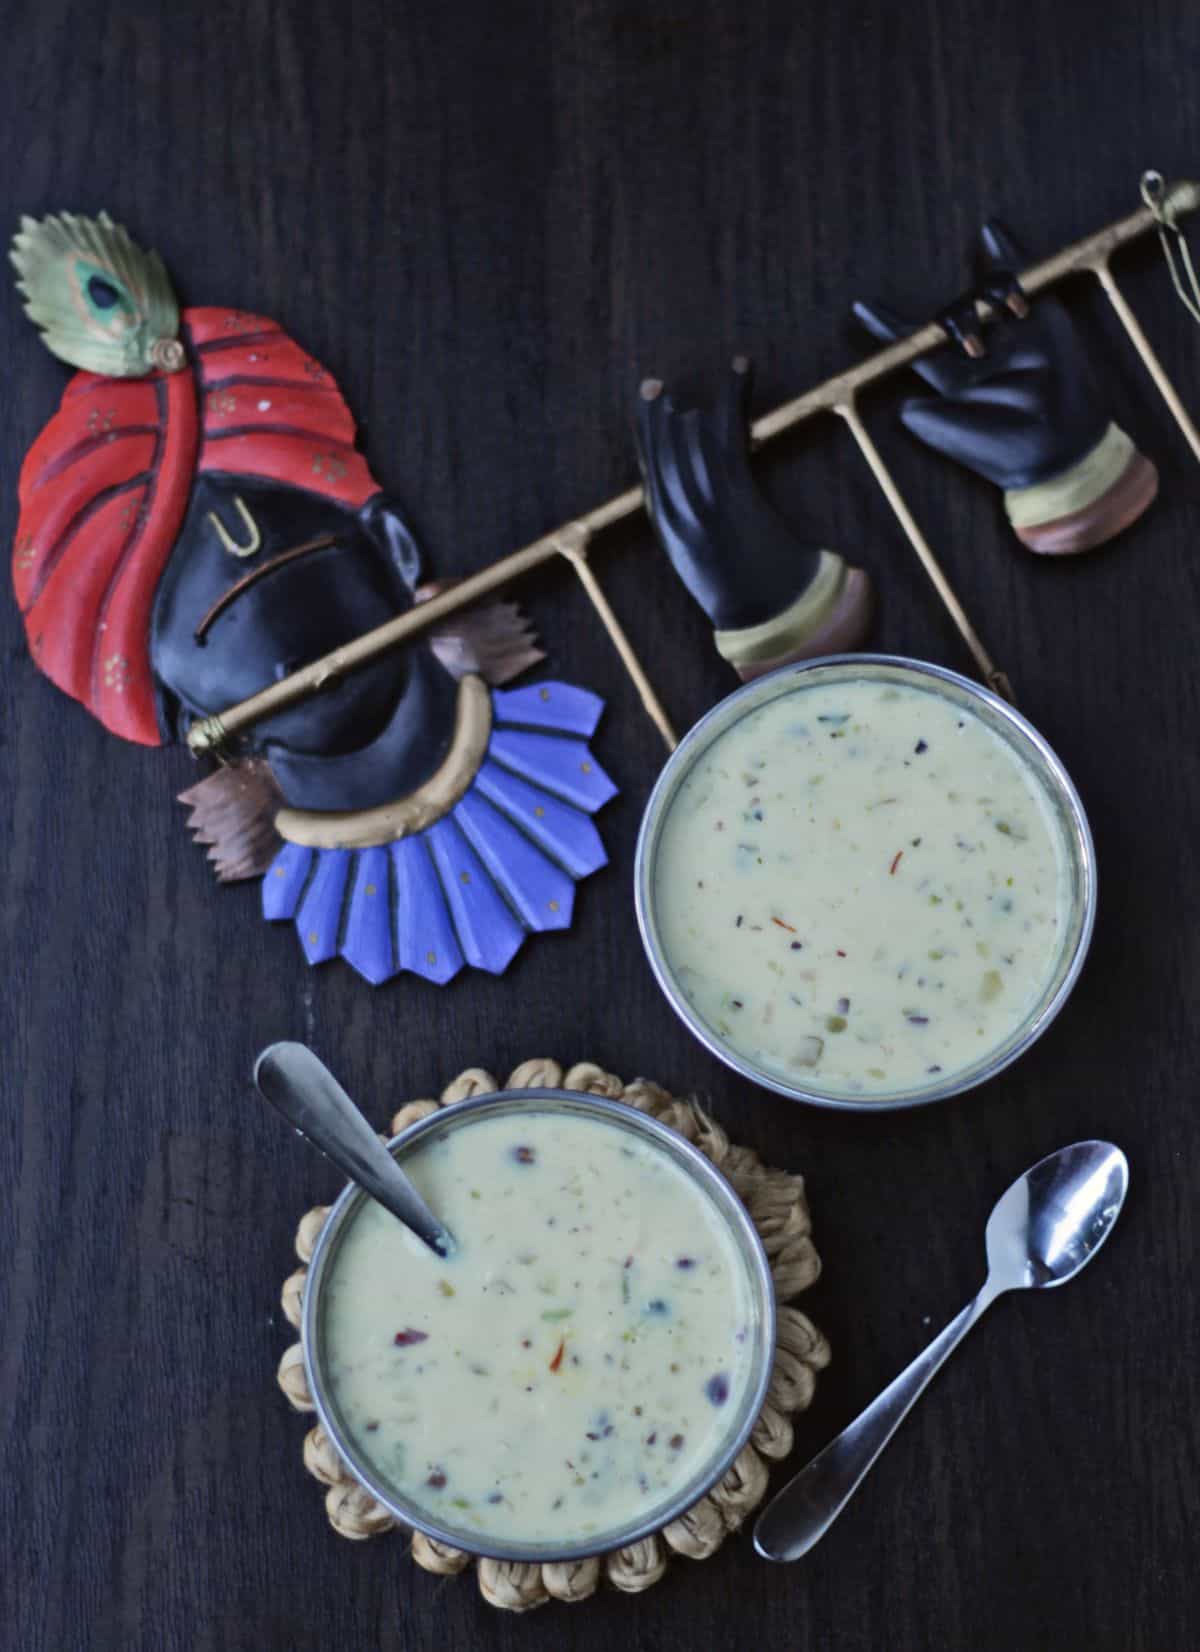 Basundi dessert in 2 cups with a spoon